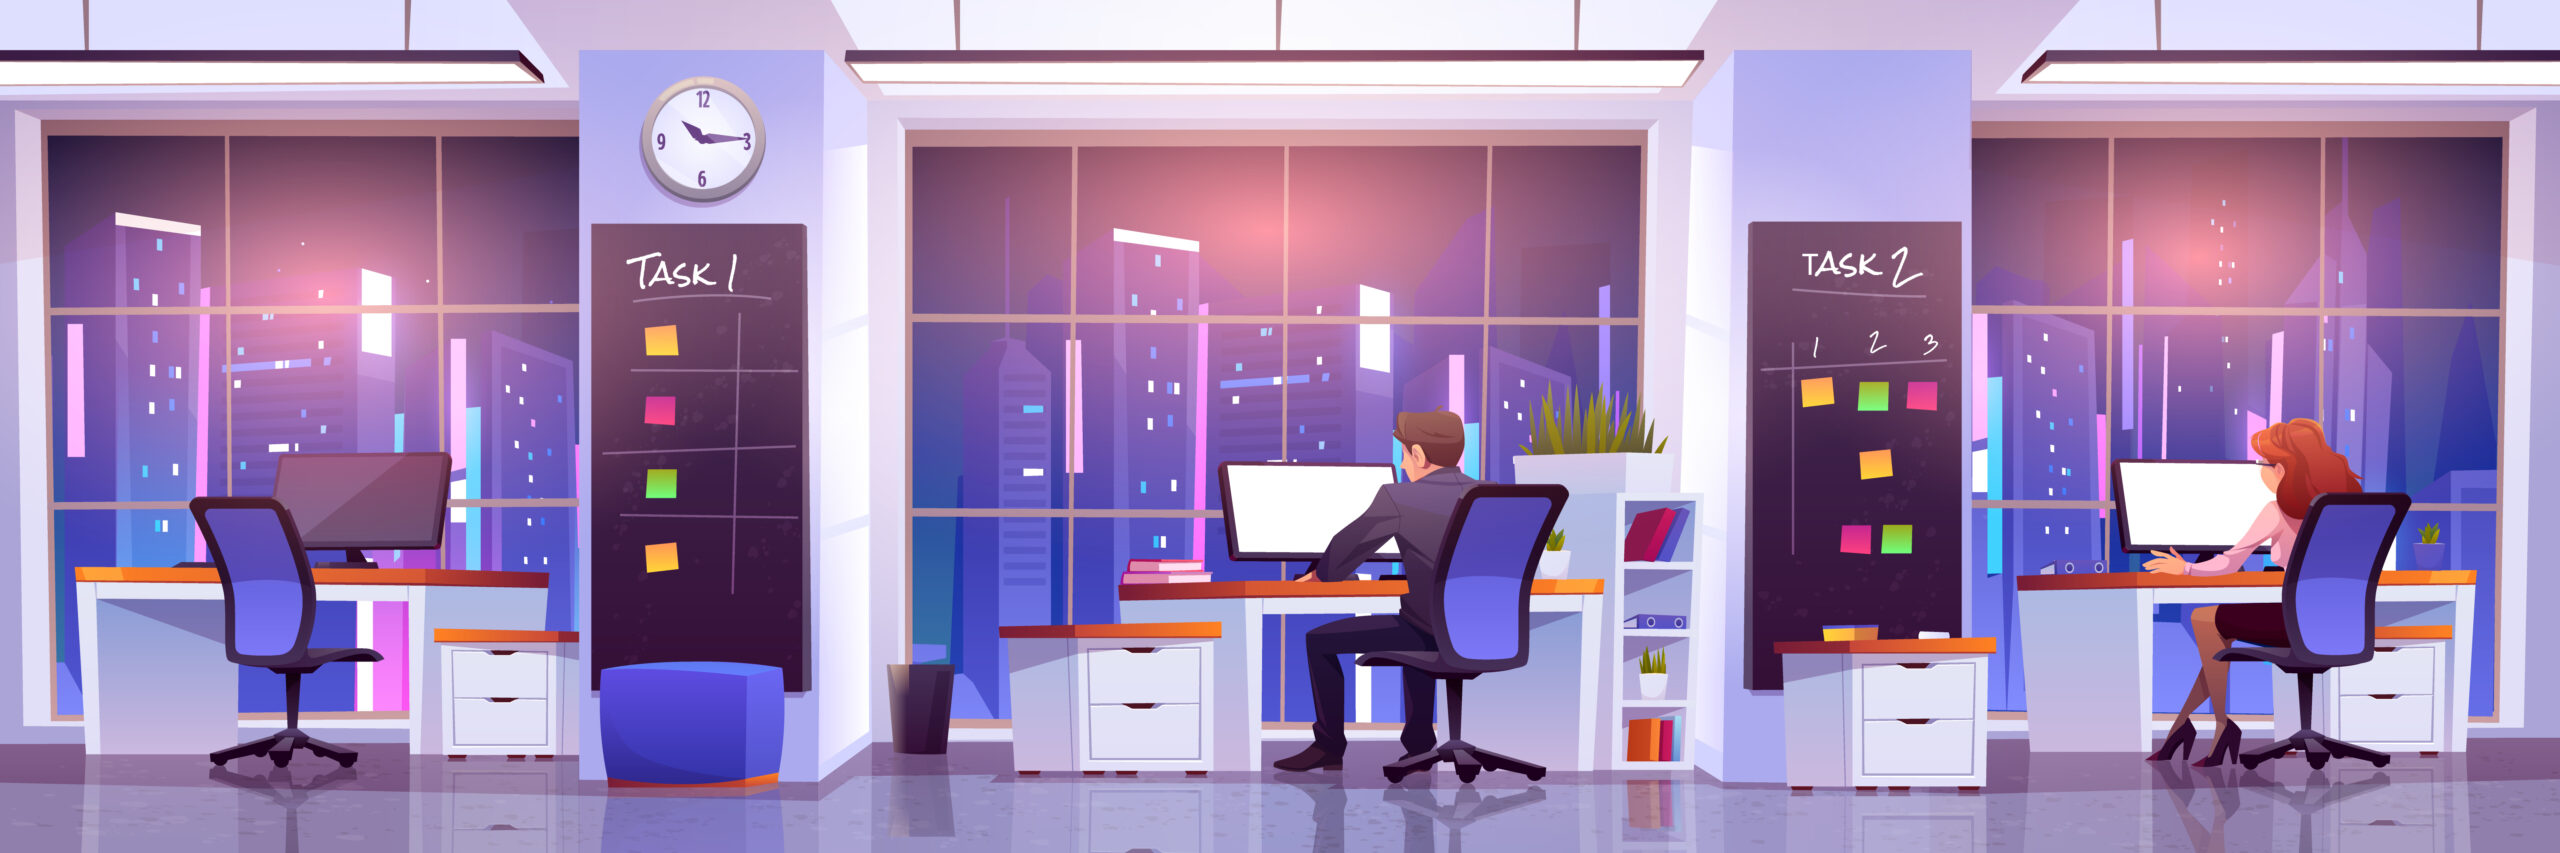 Office workers at workplace at night time. Business people man and woman rear view sitting at desks work on computers front of wide floor-to-ceiling windows with cityview, Cartoon vector illustration